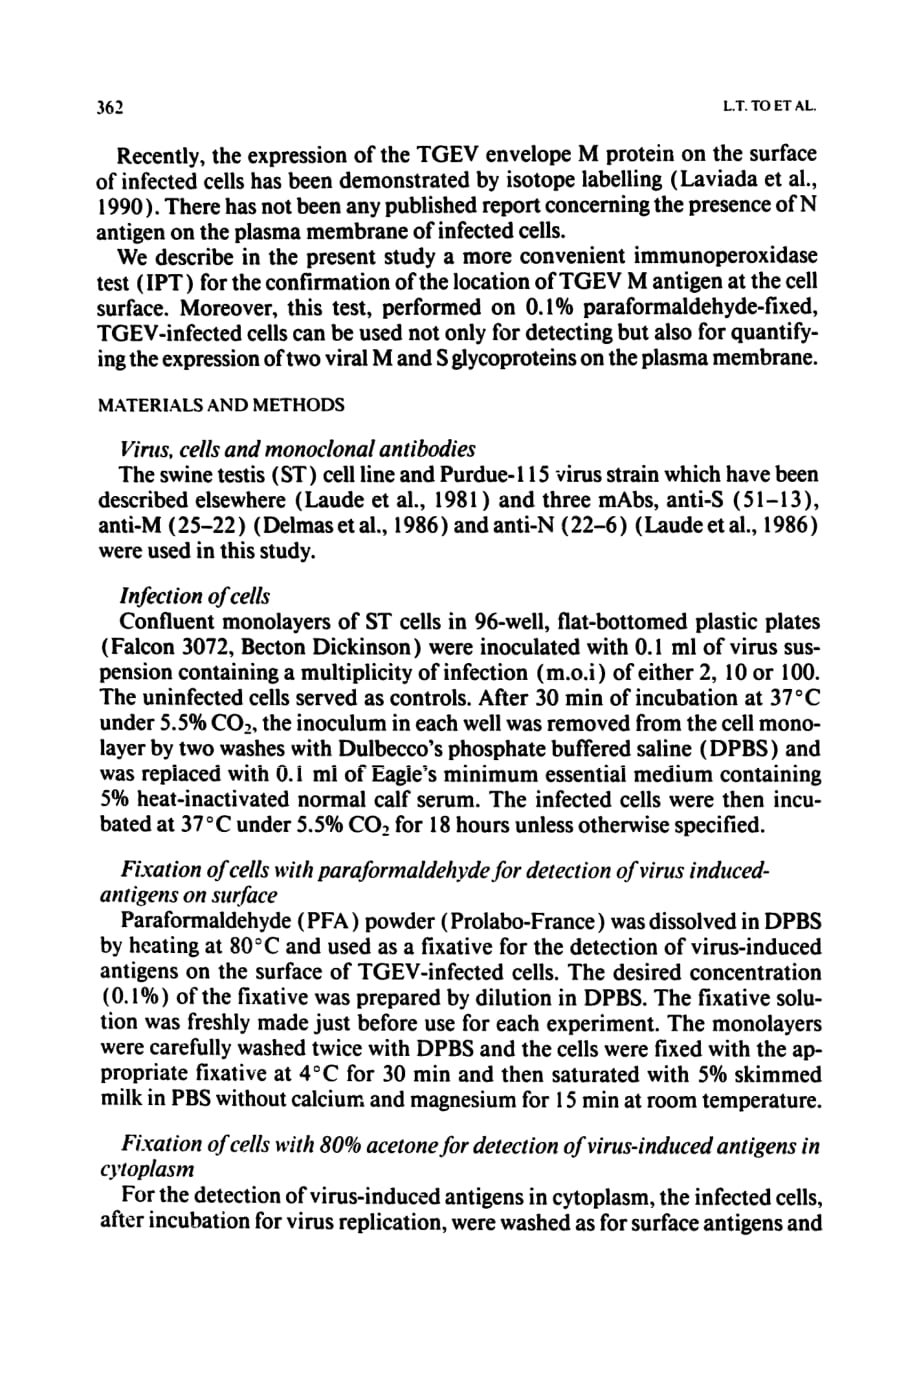 1991 Fixed-cell immunoperoxidase technique for the study of surface antigens induced by the coronavirus of transmissible_第2页